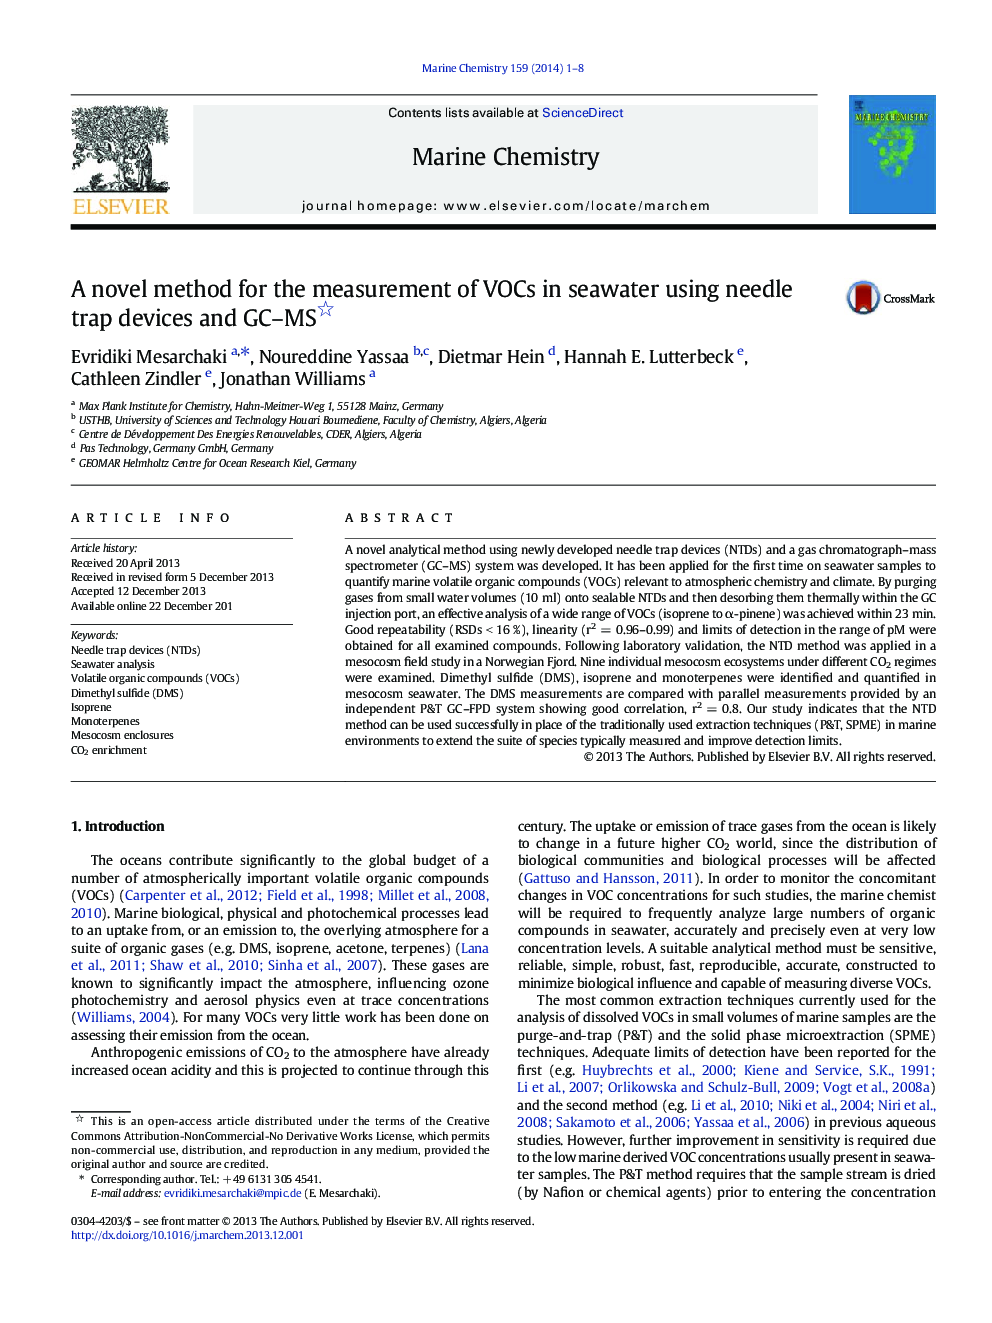 A novel method for the measurement of VOCs in seawater using needle trap devices and GC-MS